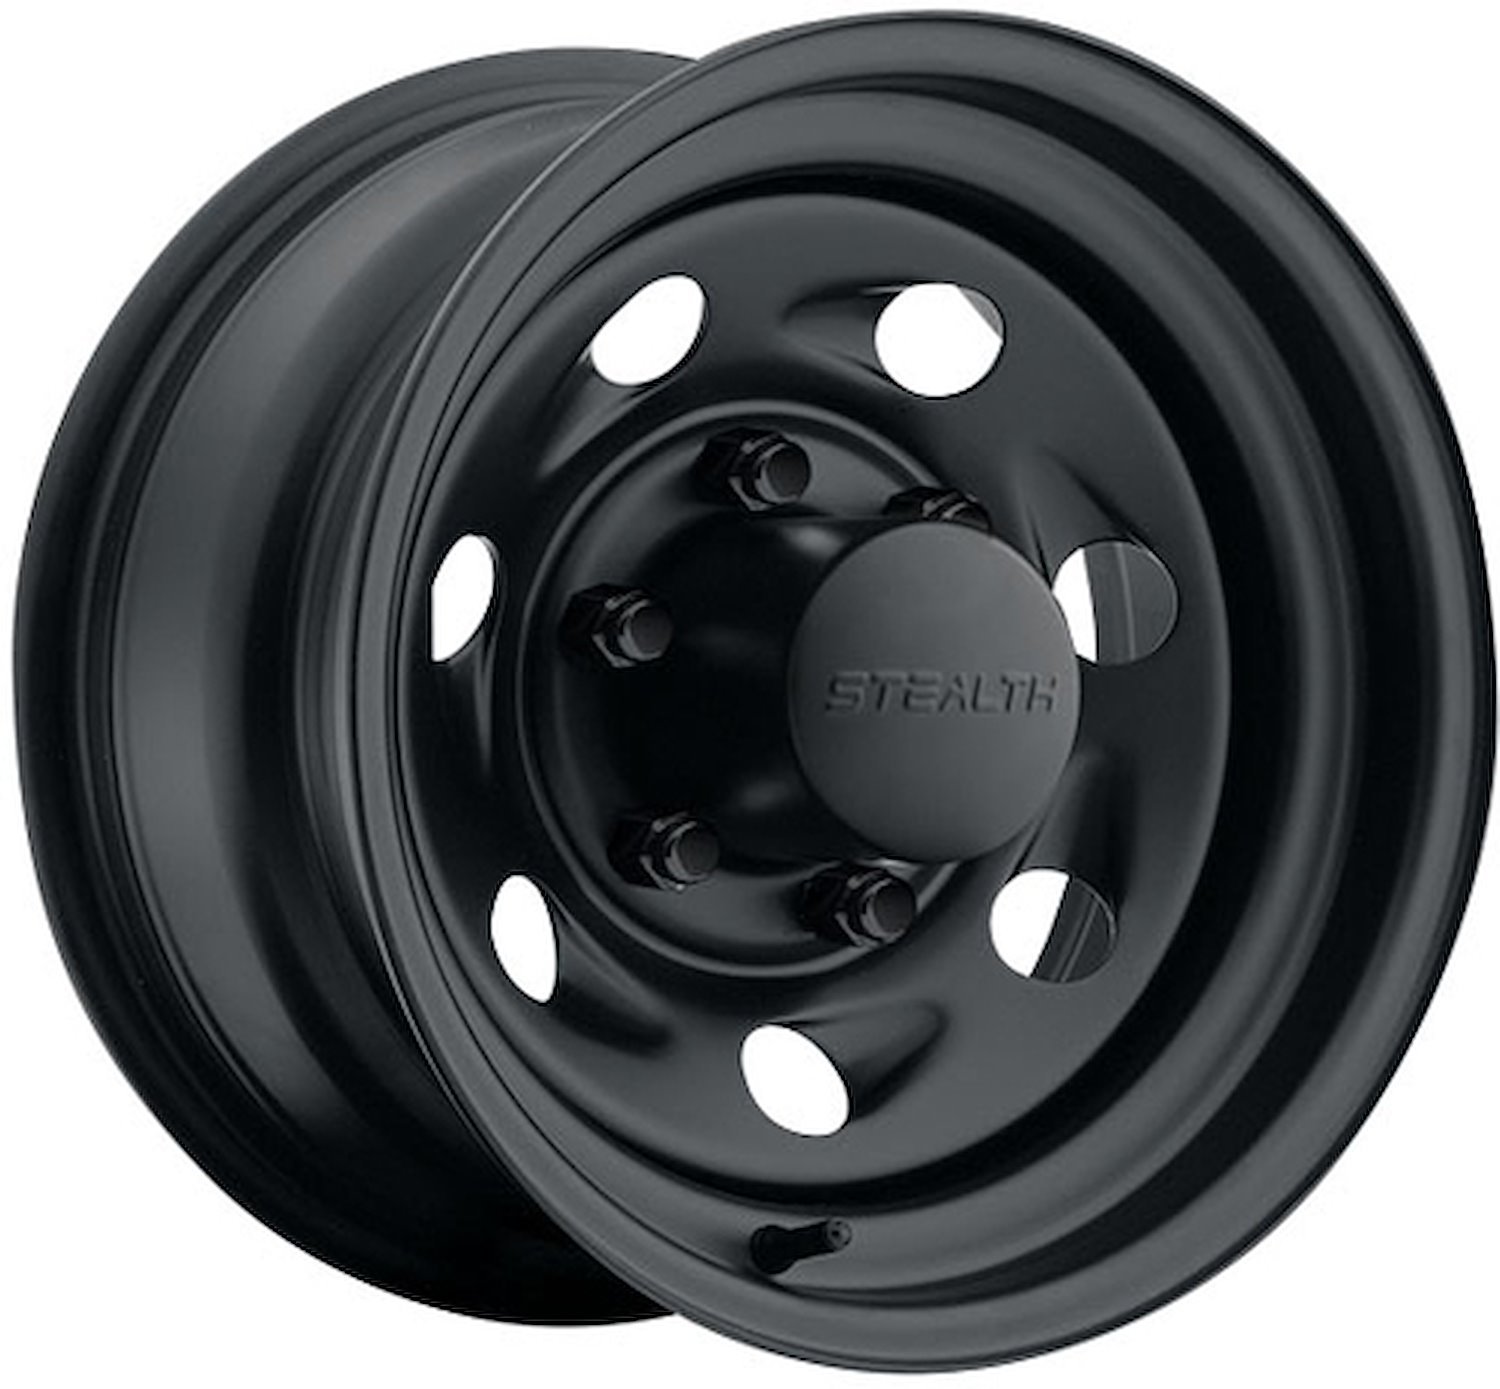 STEALTH BLACK VORTEC 15 x 8 6 x 55 Bolt Circle 4 Back Spacing 13 offset 428 Center Bore 1500 lbs Load Rating